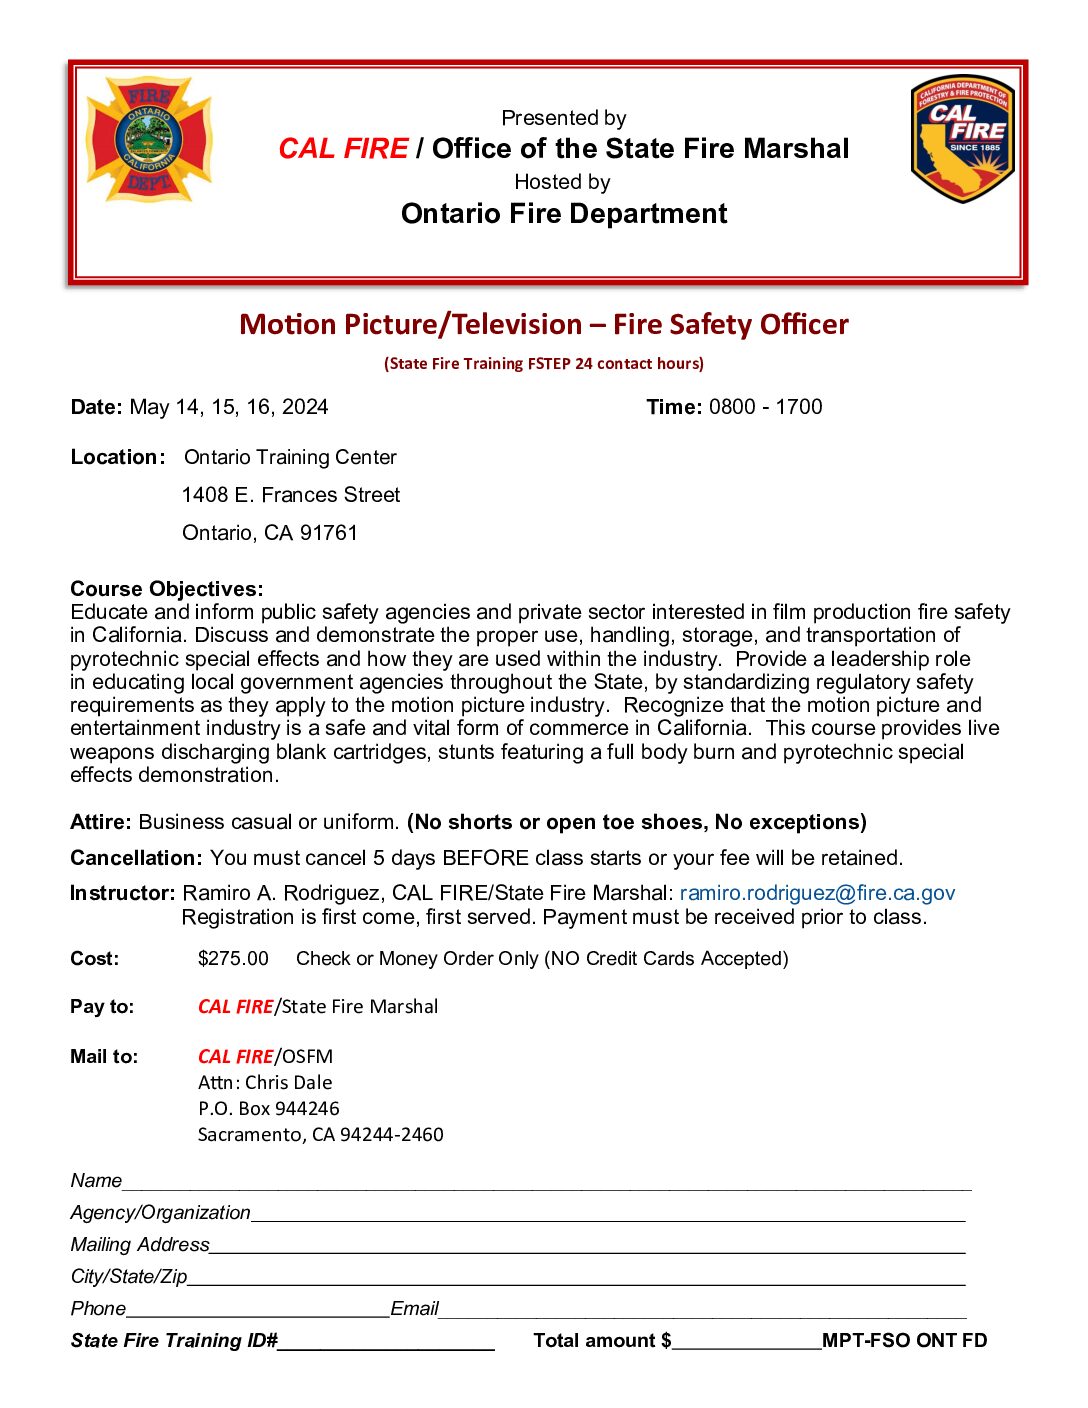 Motion Picture/Television – Fire Safety Officer Training, Presented by CAL FIRE/Office of the State Fire Marshal and Hosted by Ontario Fire Dept. May 14, 15, 16, 2024